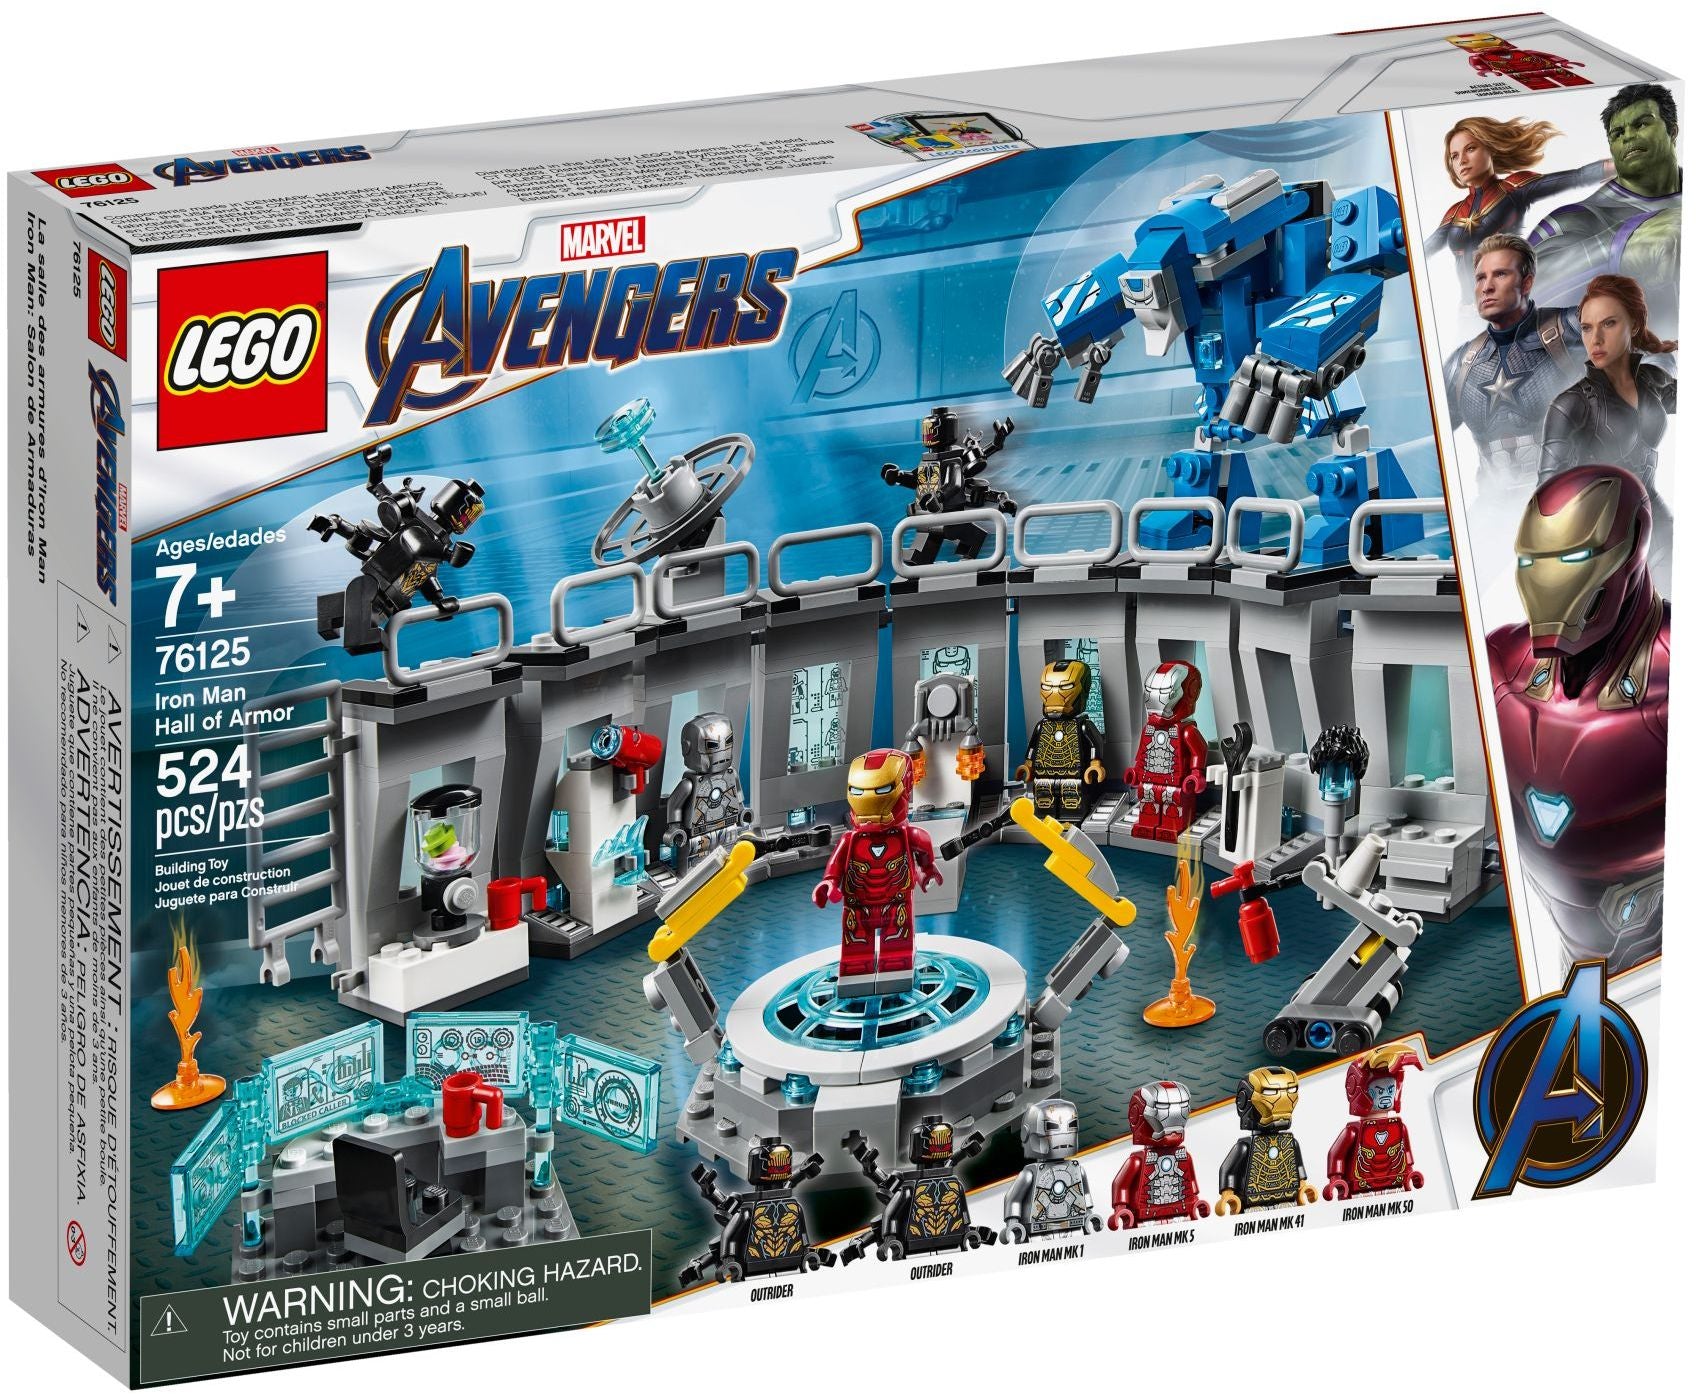 Lego Super Heroes 76125 - Iron Man Hall of Armour